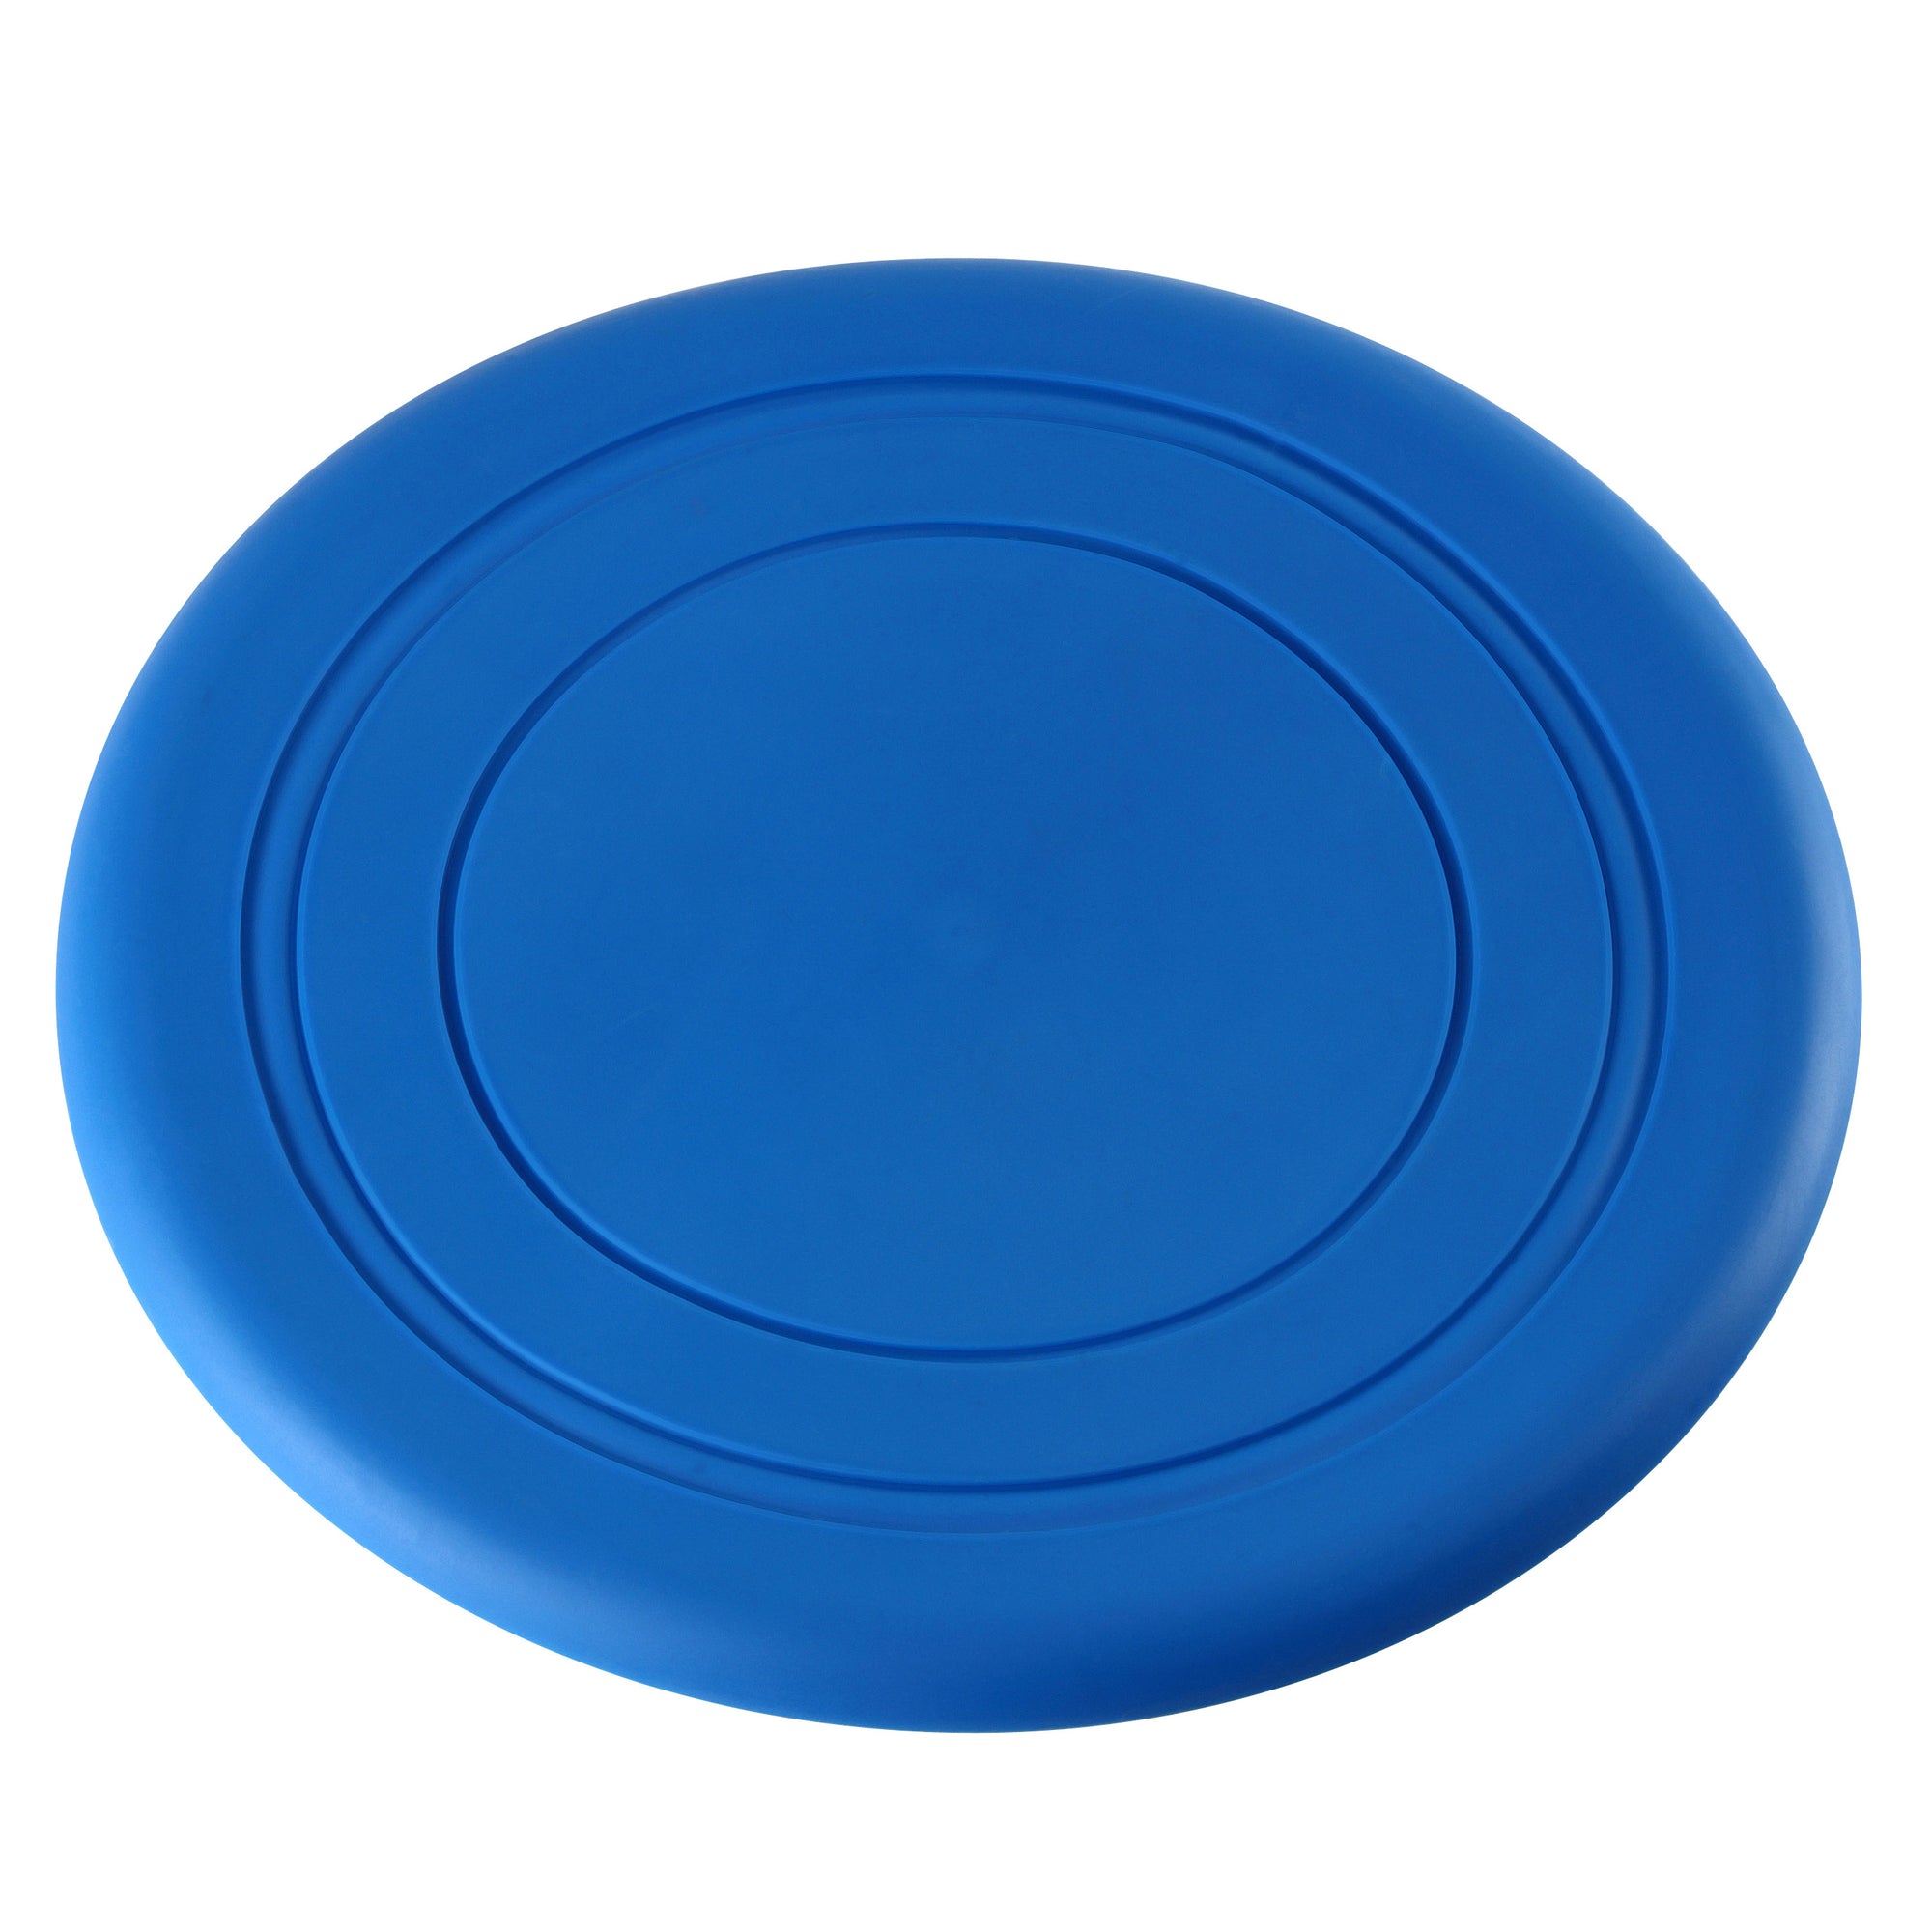 SILICONE FOLDABLE FRISBEE NEON BLUE